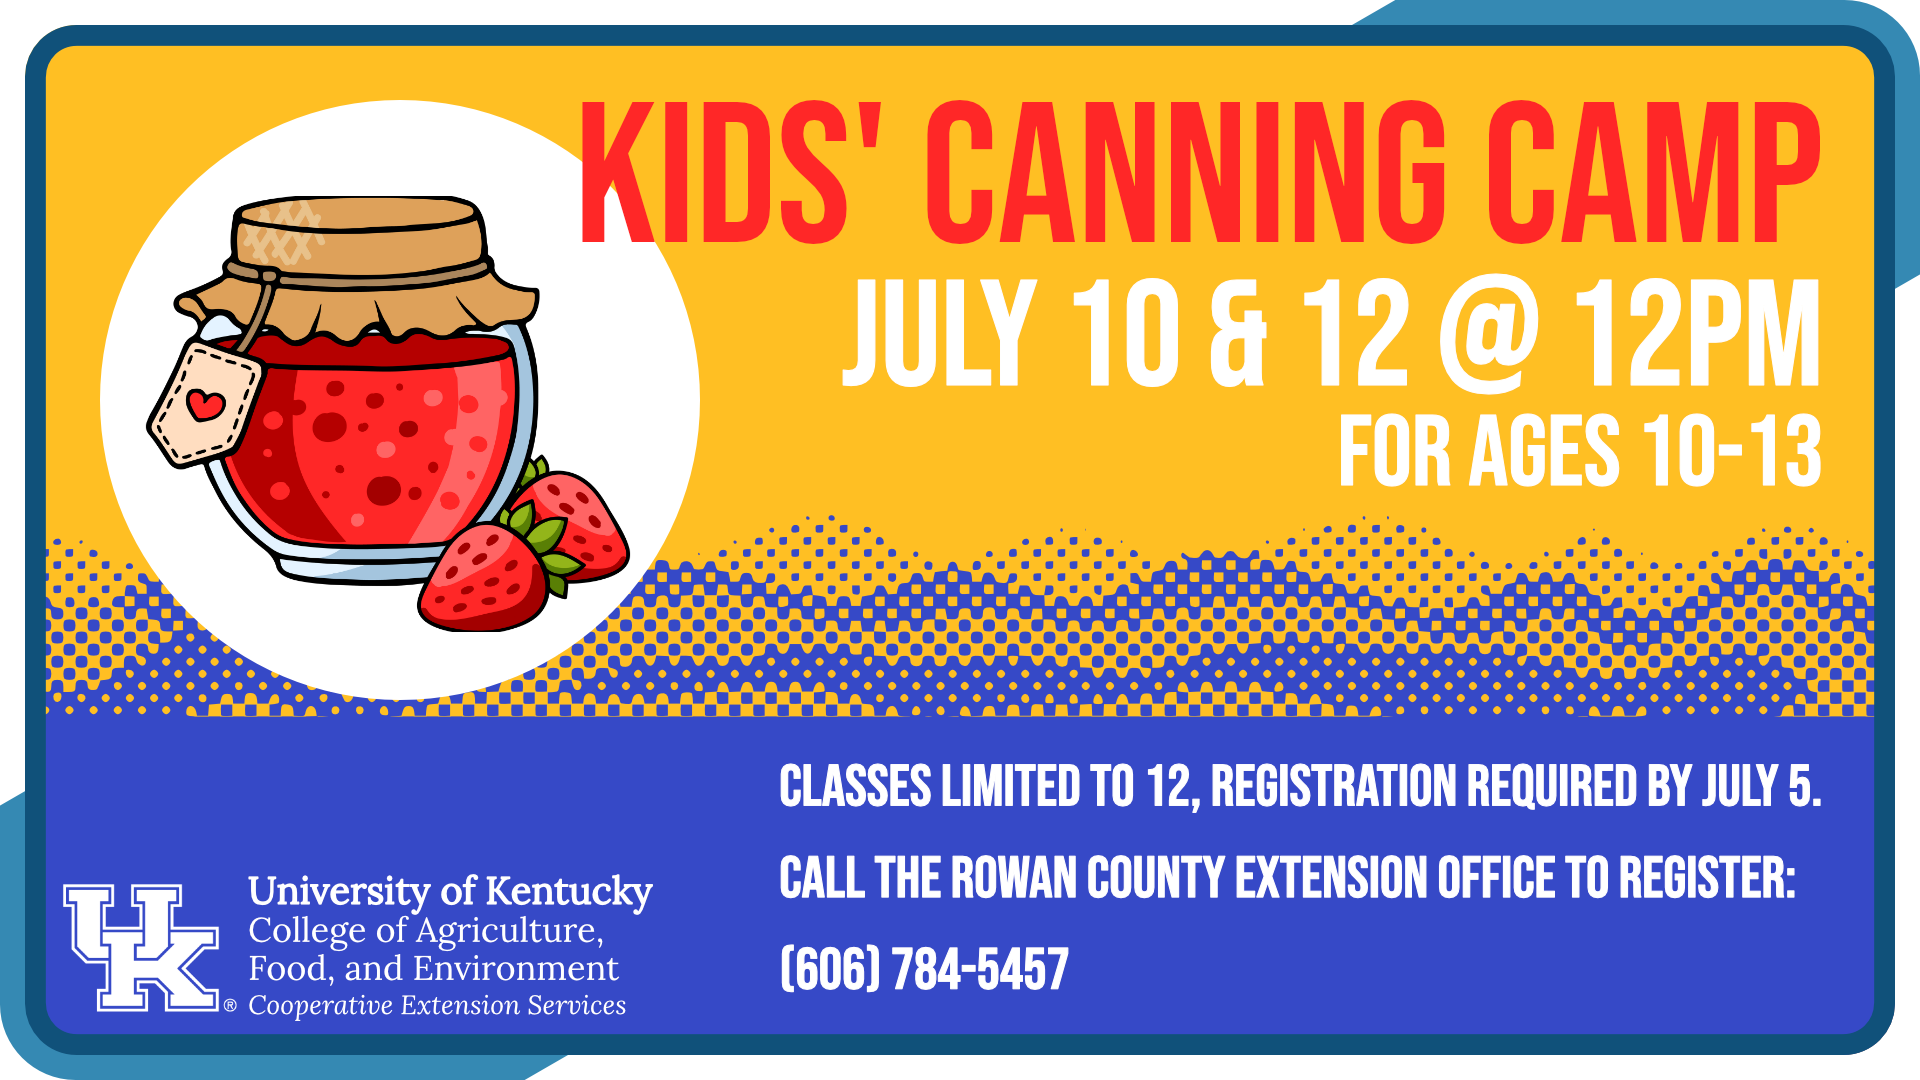 Kids' Canning Camp for ages 10 to 13, July 10 and 12, 2023 from 12pm to 2pm, registration required by July 5 through the Rowan County Extension Office